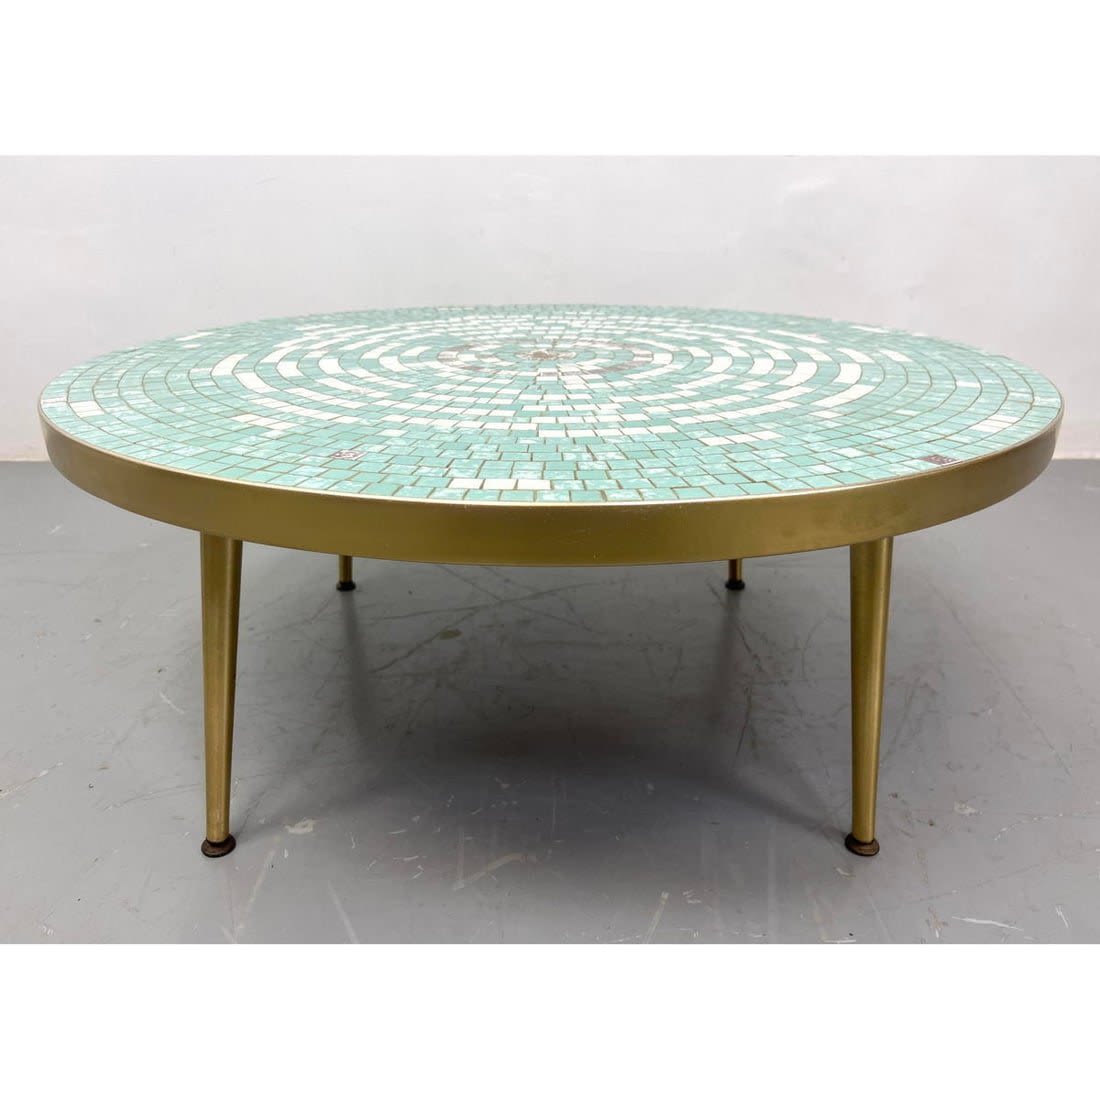 Round Glazed Tile Top Coffee table.